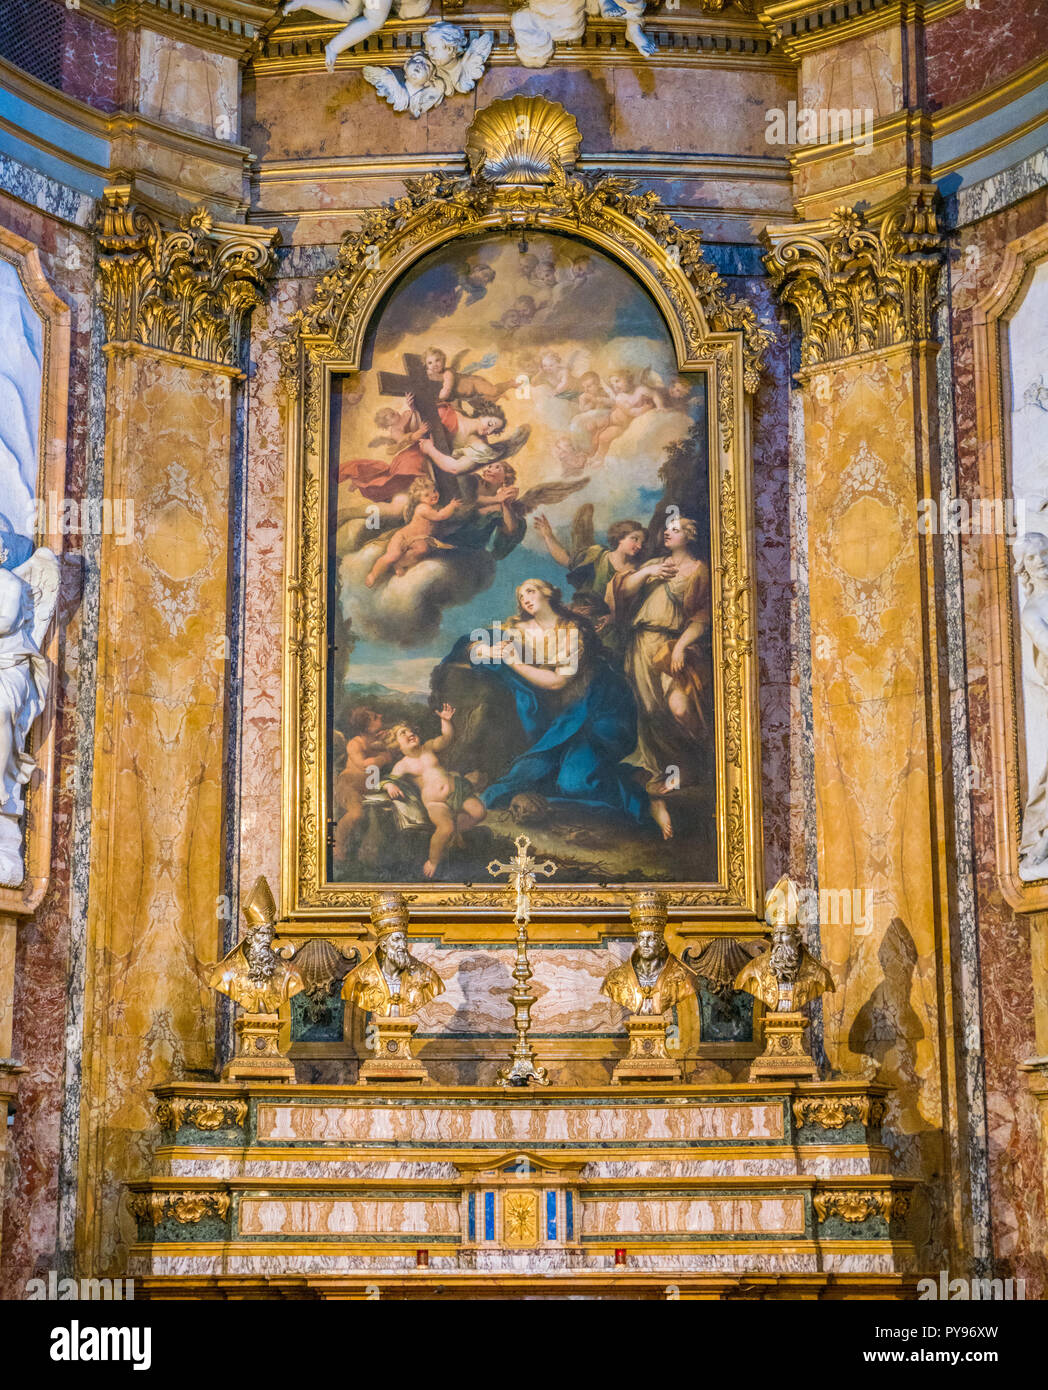 Painting 'The Penitent Magdalen Adoring the Cross' by Michele Rocca, in the altar of the Church of Santa Maria Maddalena in Rome, Italy. Stock Photo